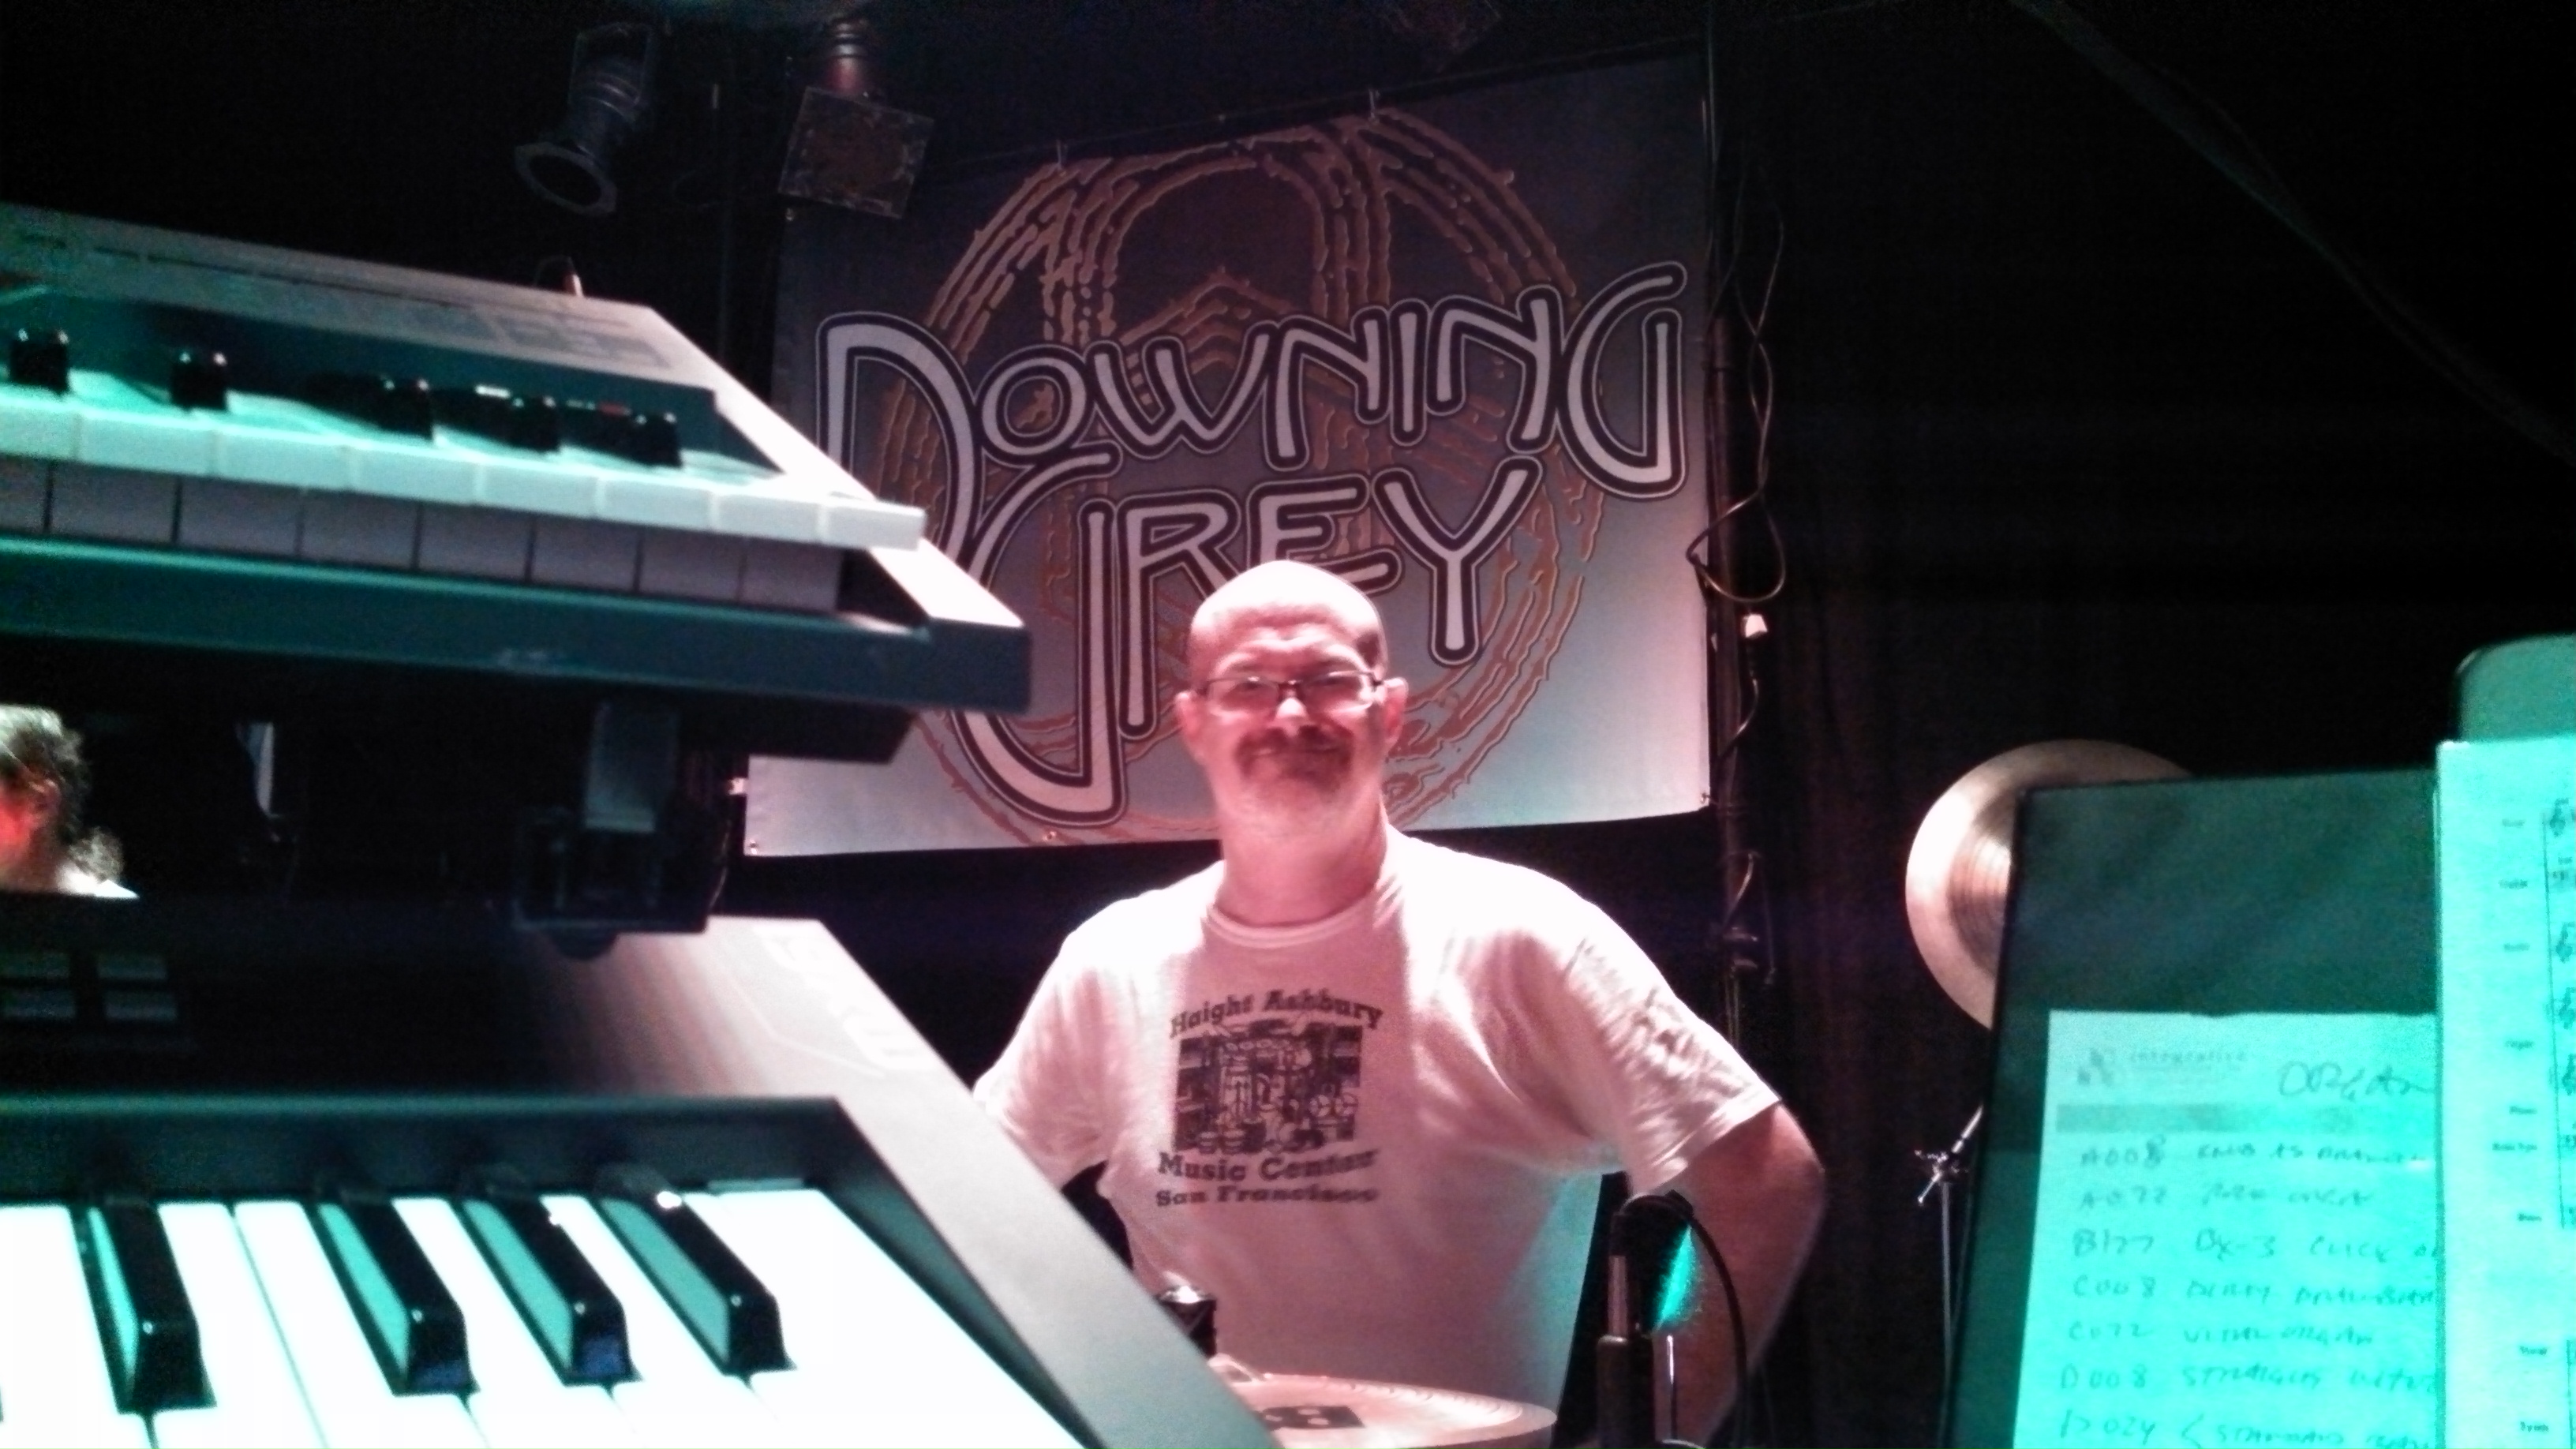 View of Darin and the banner from Andrew's "keyboard cockpit".